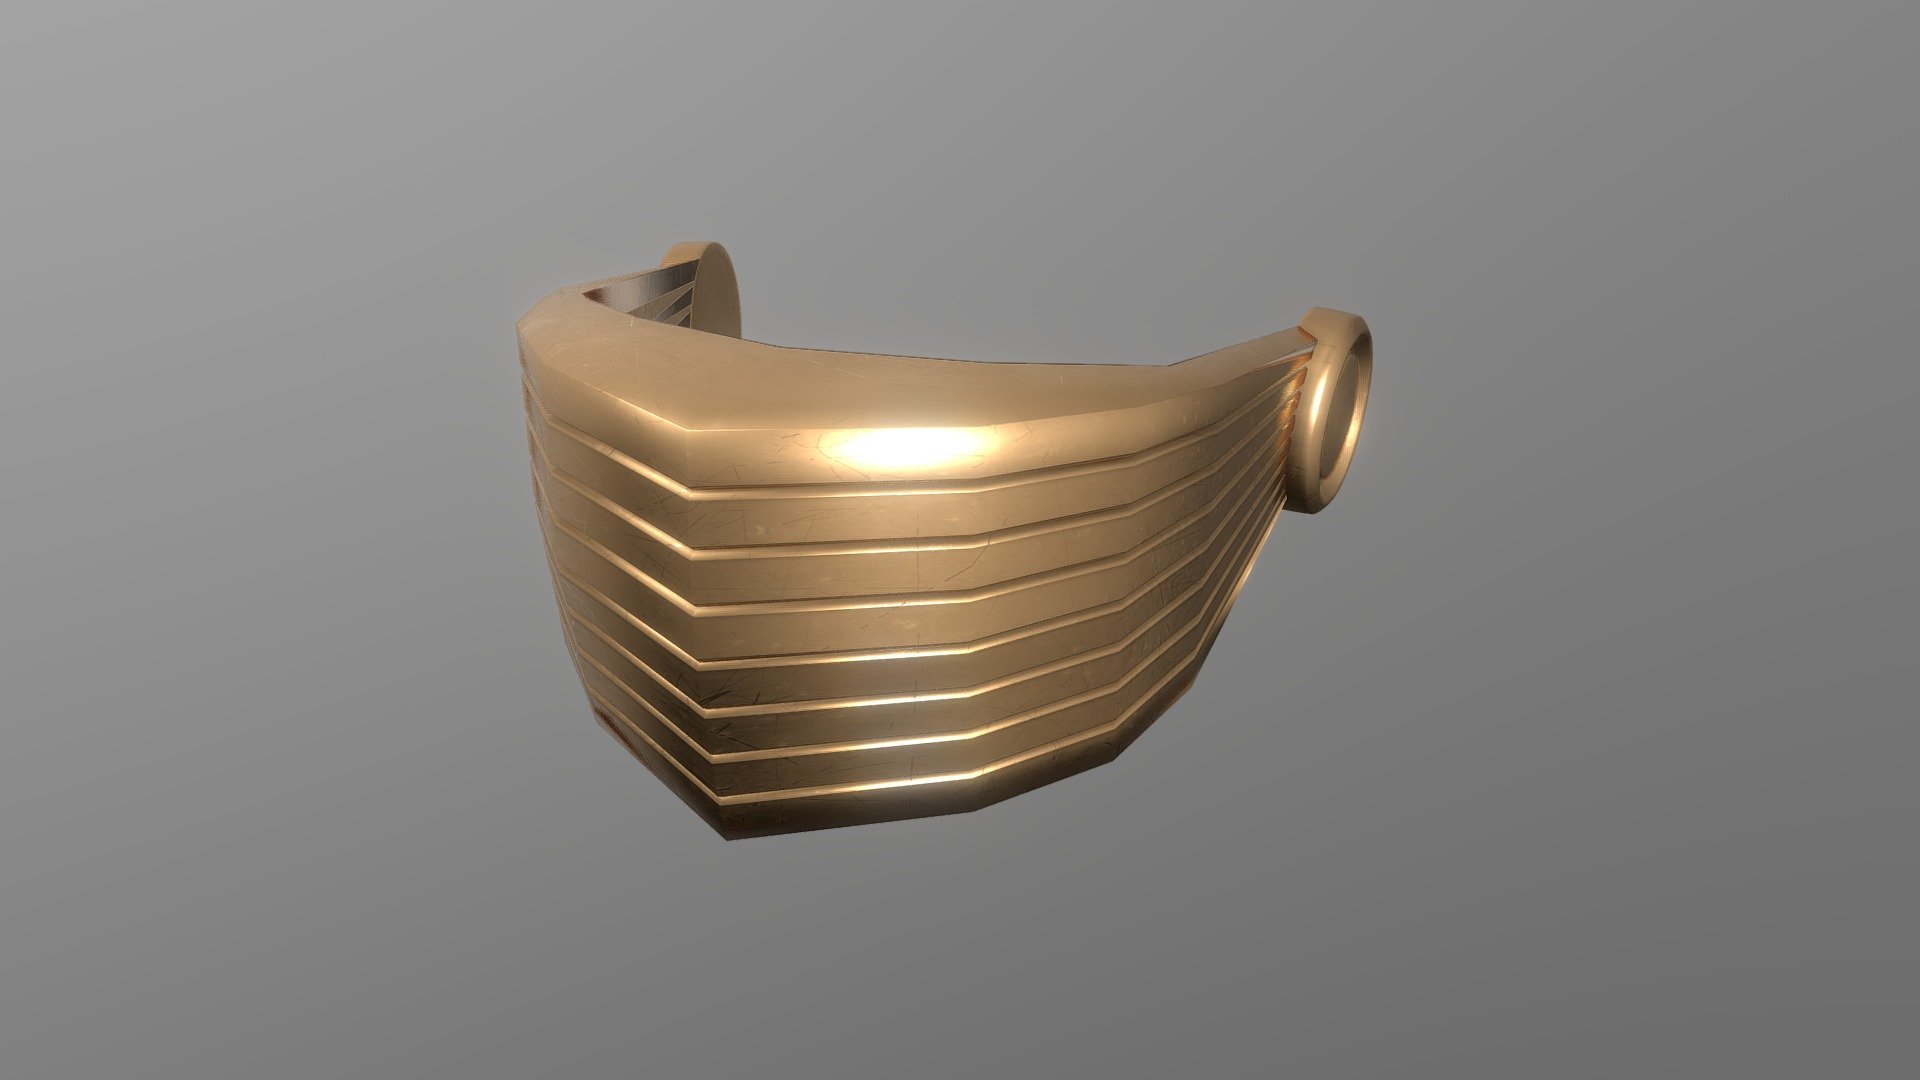 Striped Visor (copper)
Bring your project to life with this mid poly 3D model of Striped Visor. Perfect for use in games, animations, VR, AR, and more, this model is optimized for performance and still retains a high level of detail.


Features



Mid  poly design with 2,980 vertices

5,806 edges

2,832 faces (polygons)

5,660 tris

2k PBR Textures and materials

File formats included: .obj, .fbx, .dae, .stl


Tools Used
This Striped Visor mid poly 3D model was created using Blender 3.3.1, a popular and versatile 3D creation software.


Availability
This mid poly Striped Visor 3D model is ready for use and available for purchase. Bring your project to the next level with this high-quality and optimized model 3d model